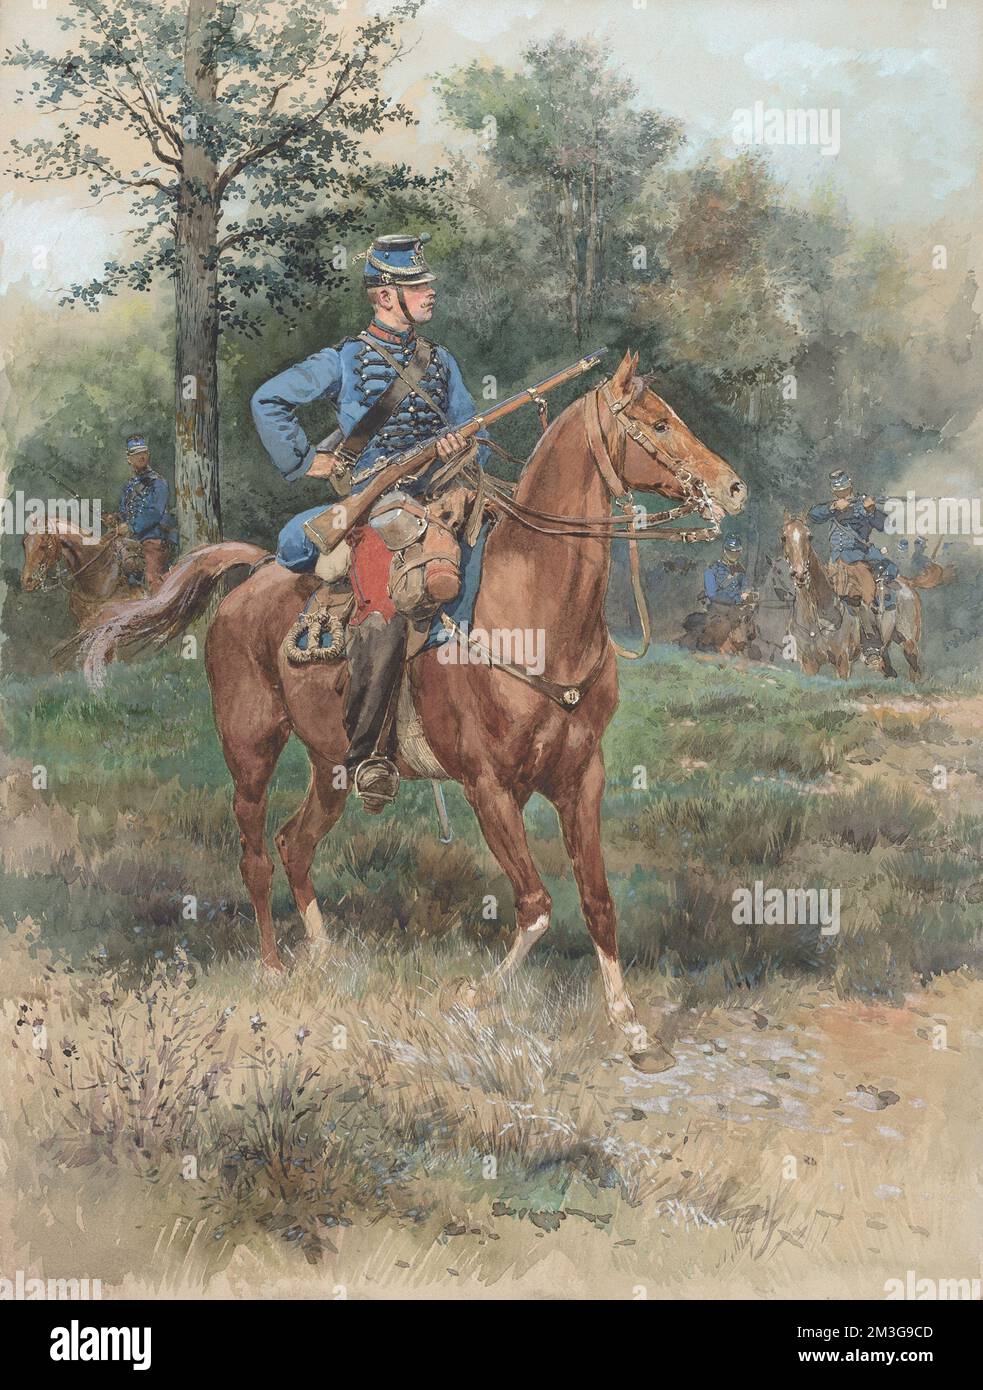 'Jean-Baptiste-Edouard Detaille, Chasseur à Cheval (Soldier on Horseback), 1885, watercolor and gouache on wove paper, sheet: 39.7 x 29.9 cm (15 5/8 x 11 3/4 in.), Purchased as the Gift of Alexander M. and Judith W. Laughlin, 2012.66.1' Stock Photo